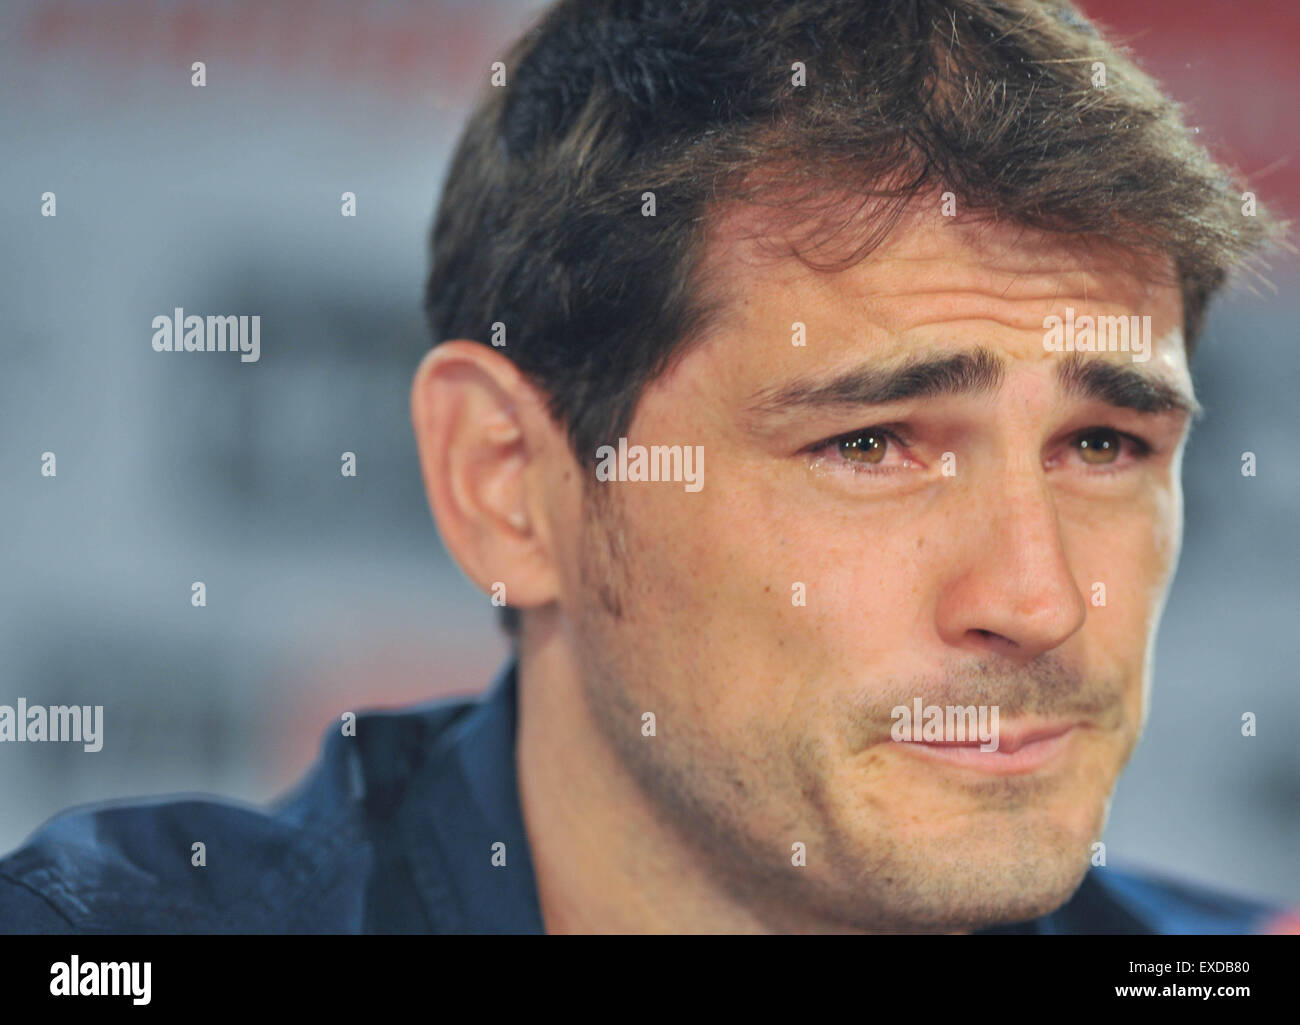 Madrid, Spain. 12th July, 2015. Real Madrid's goalkeeper Iker Casillas sheds tears during the press conference at the Santiago Bernabeu stadium in Madrid, Spain, July 12, 2015. The 34-year-old Iker Casillas will leave the Spanish La Liga top club for FC Porto after 25 years. Credit:  Xie Haining/Xinhua/Alamy Live News Stock Photo